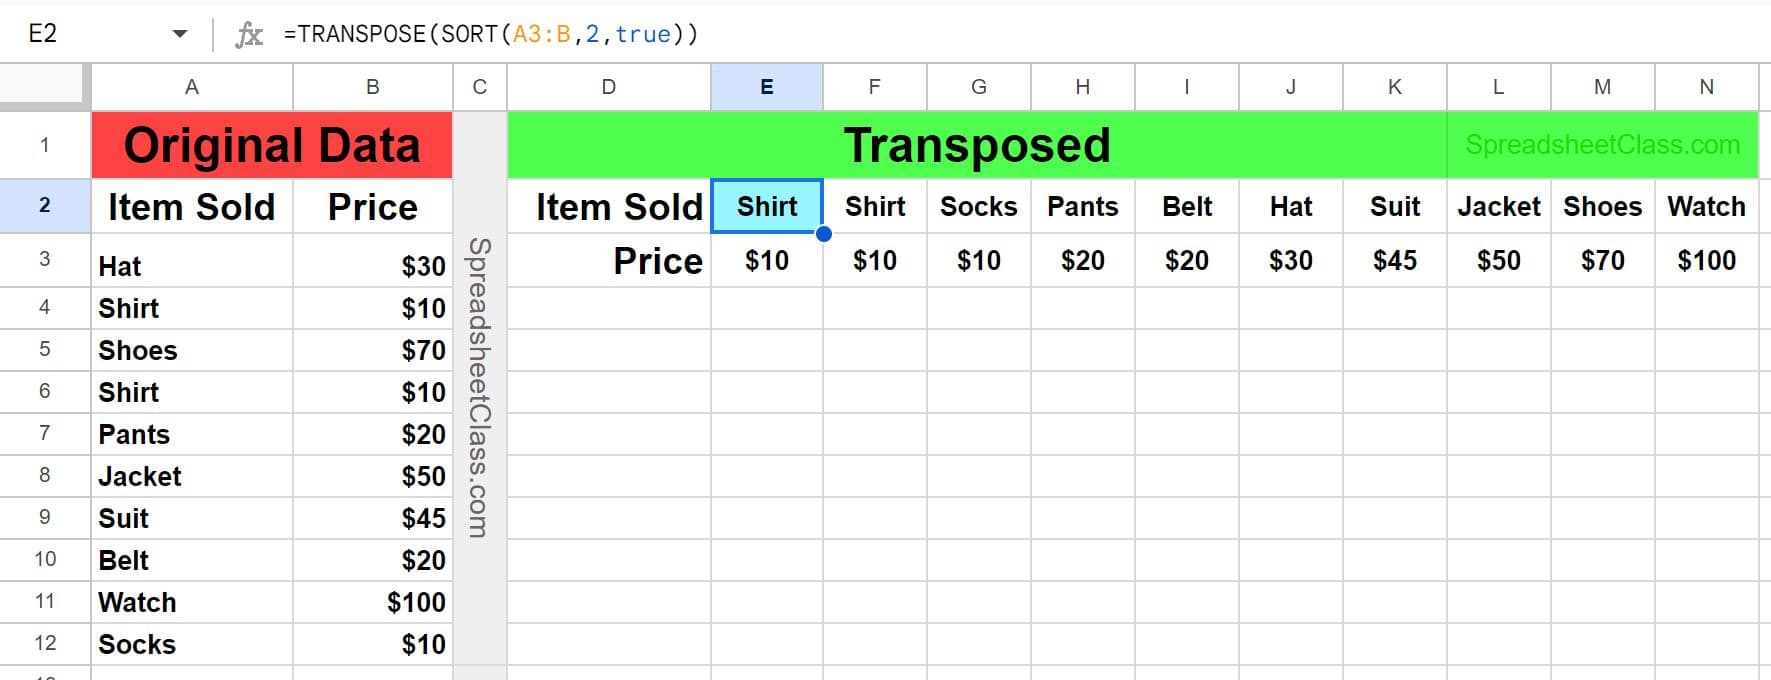 Example of How to transpose and sort vertical data and make it horizontal with the TRANSPOSE and SORT functions inventory example columns to rows in Google Sheets